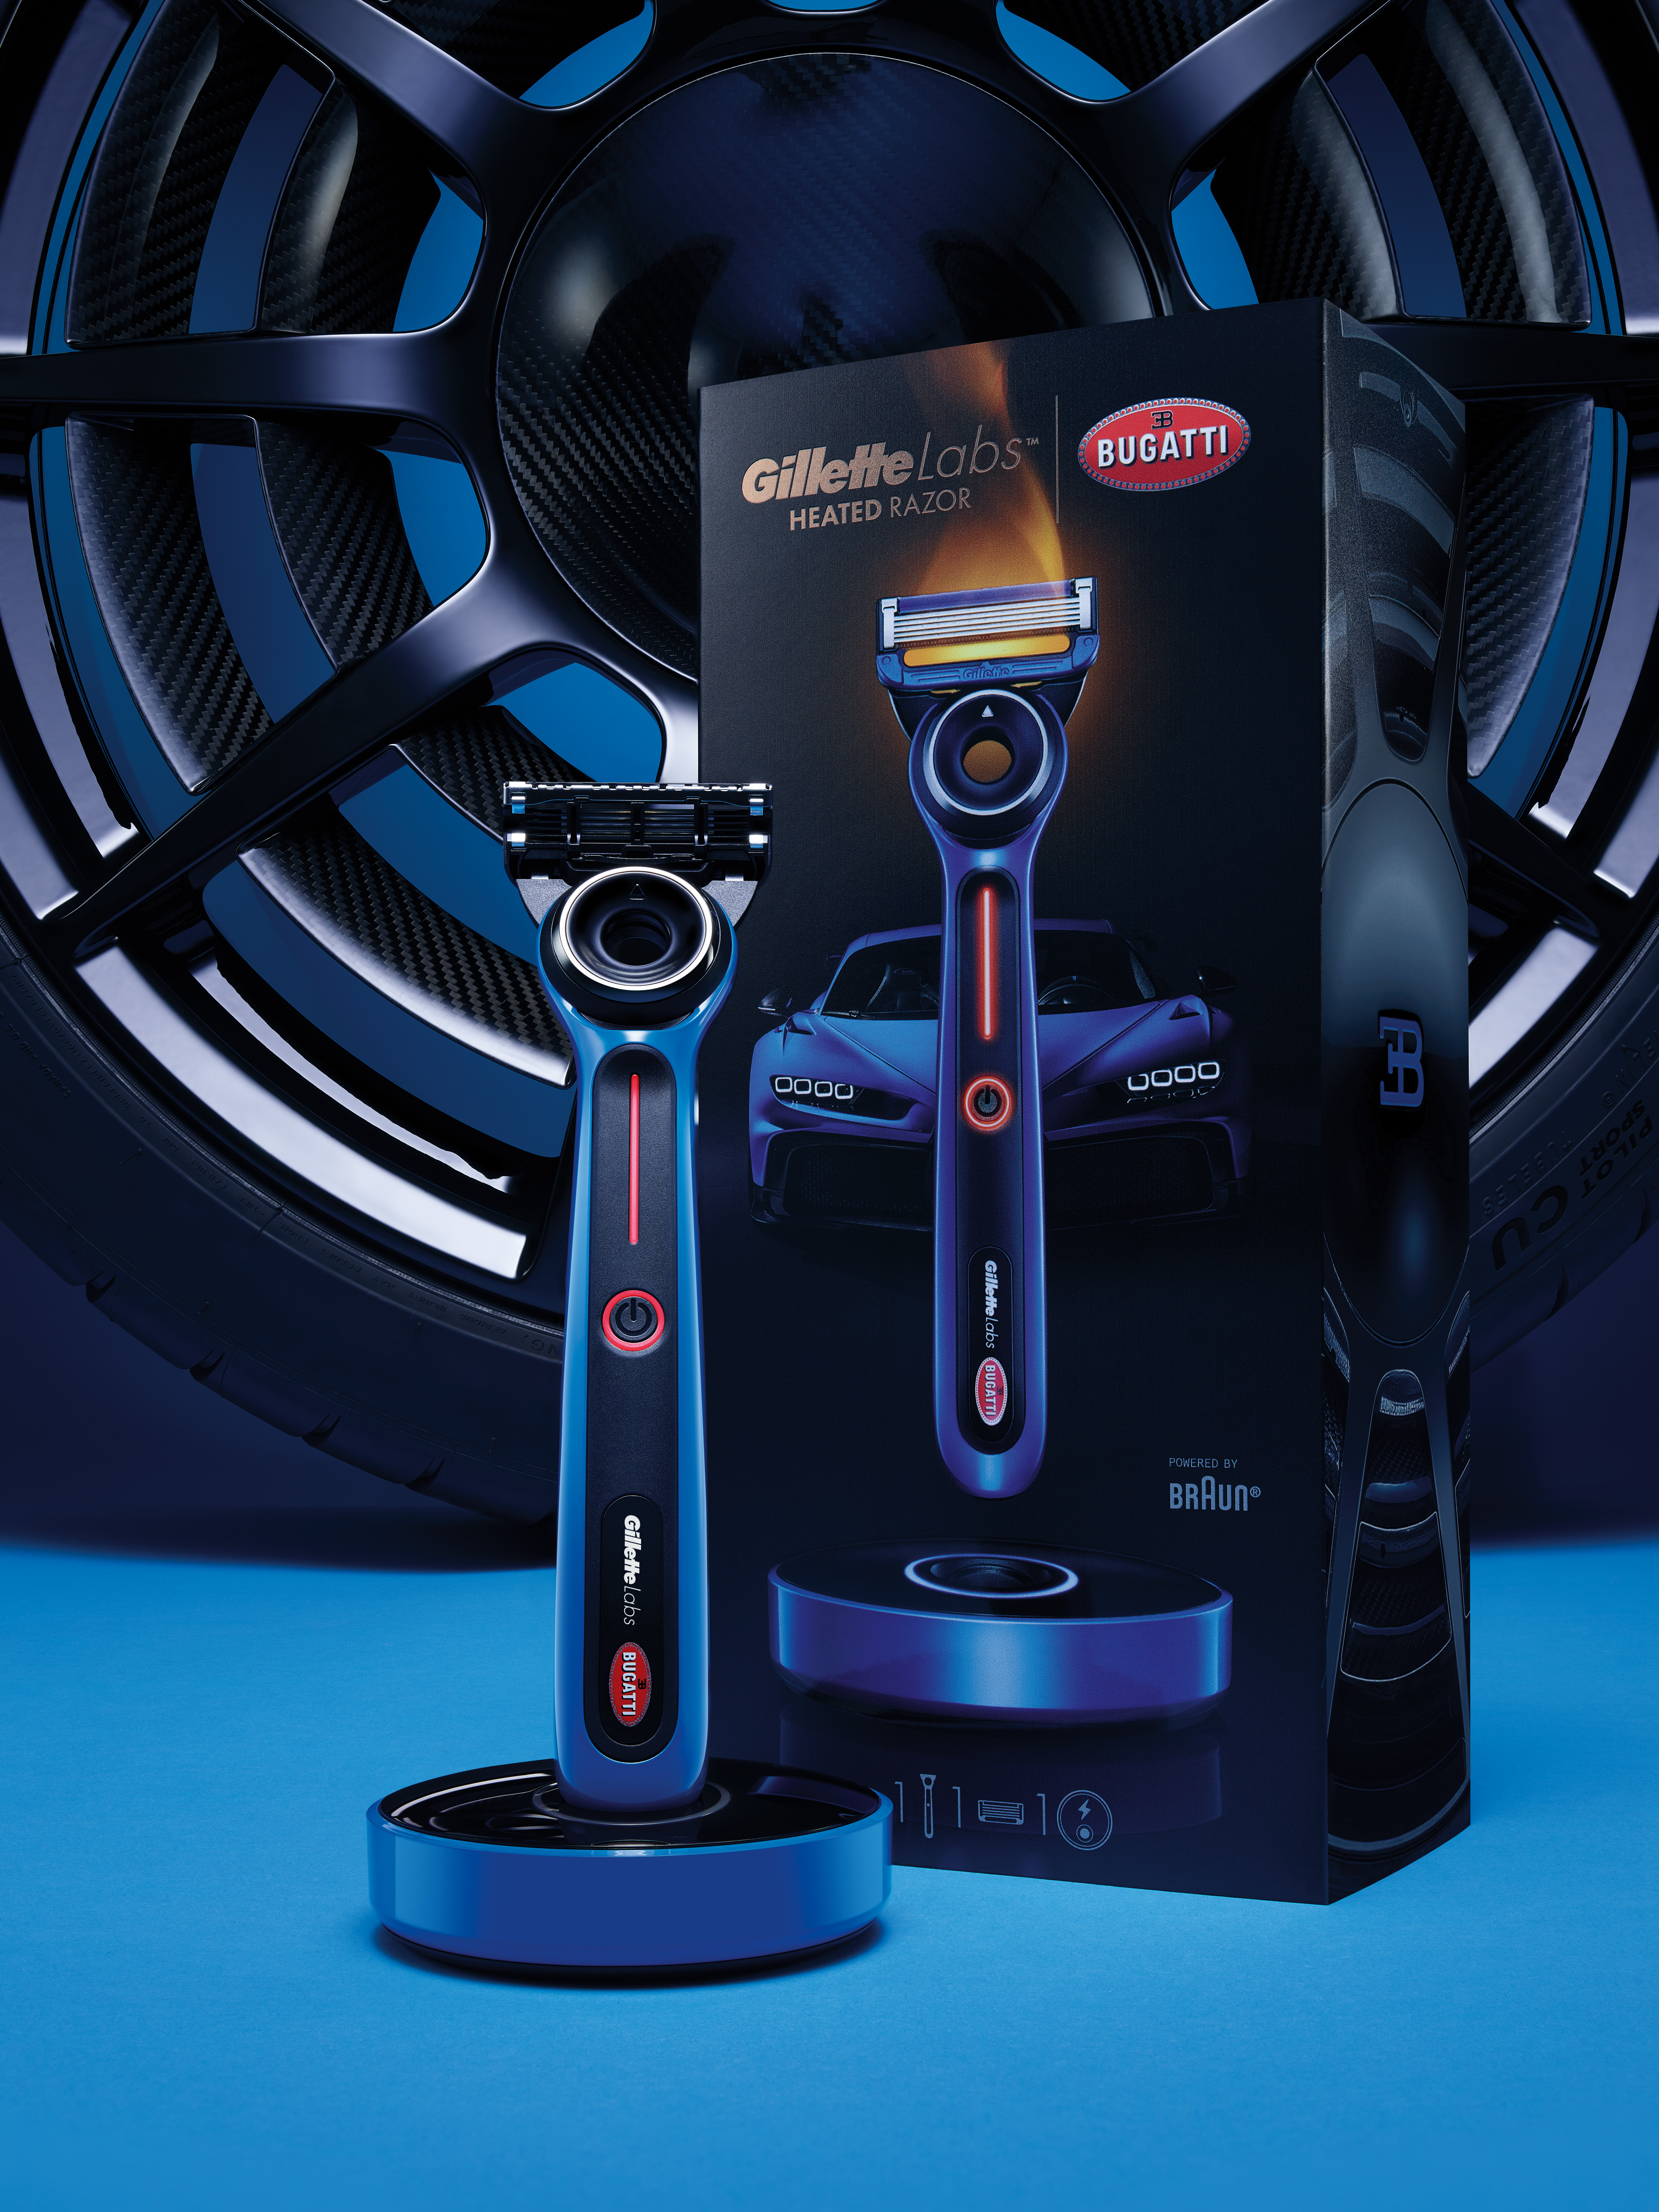 Gillette &#038; Bugatti Team Up For The King Of Heated Razors